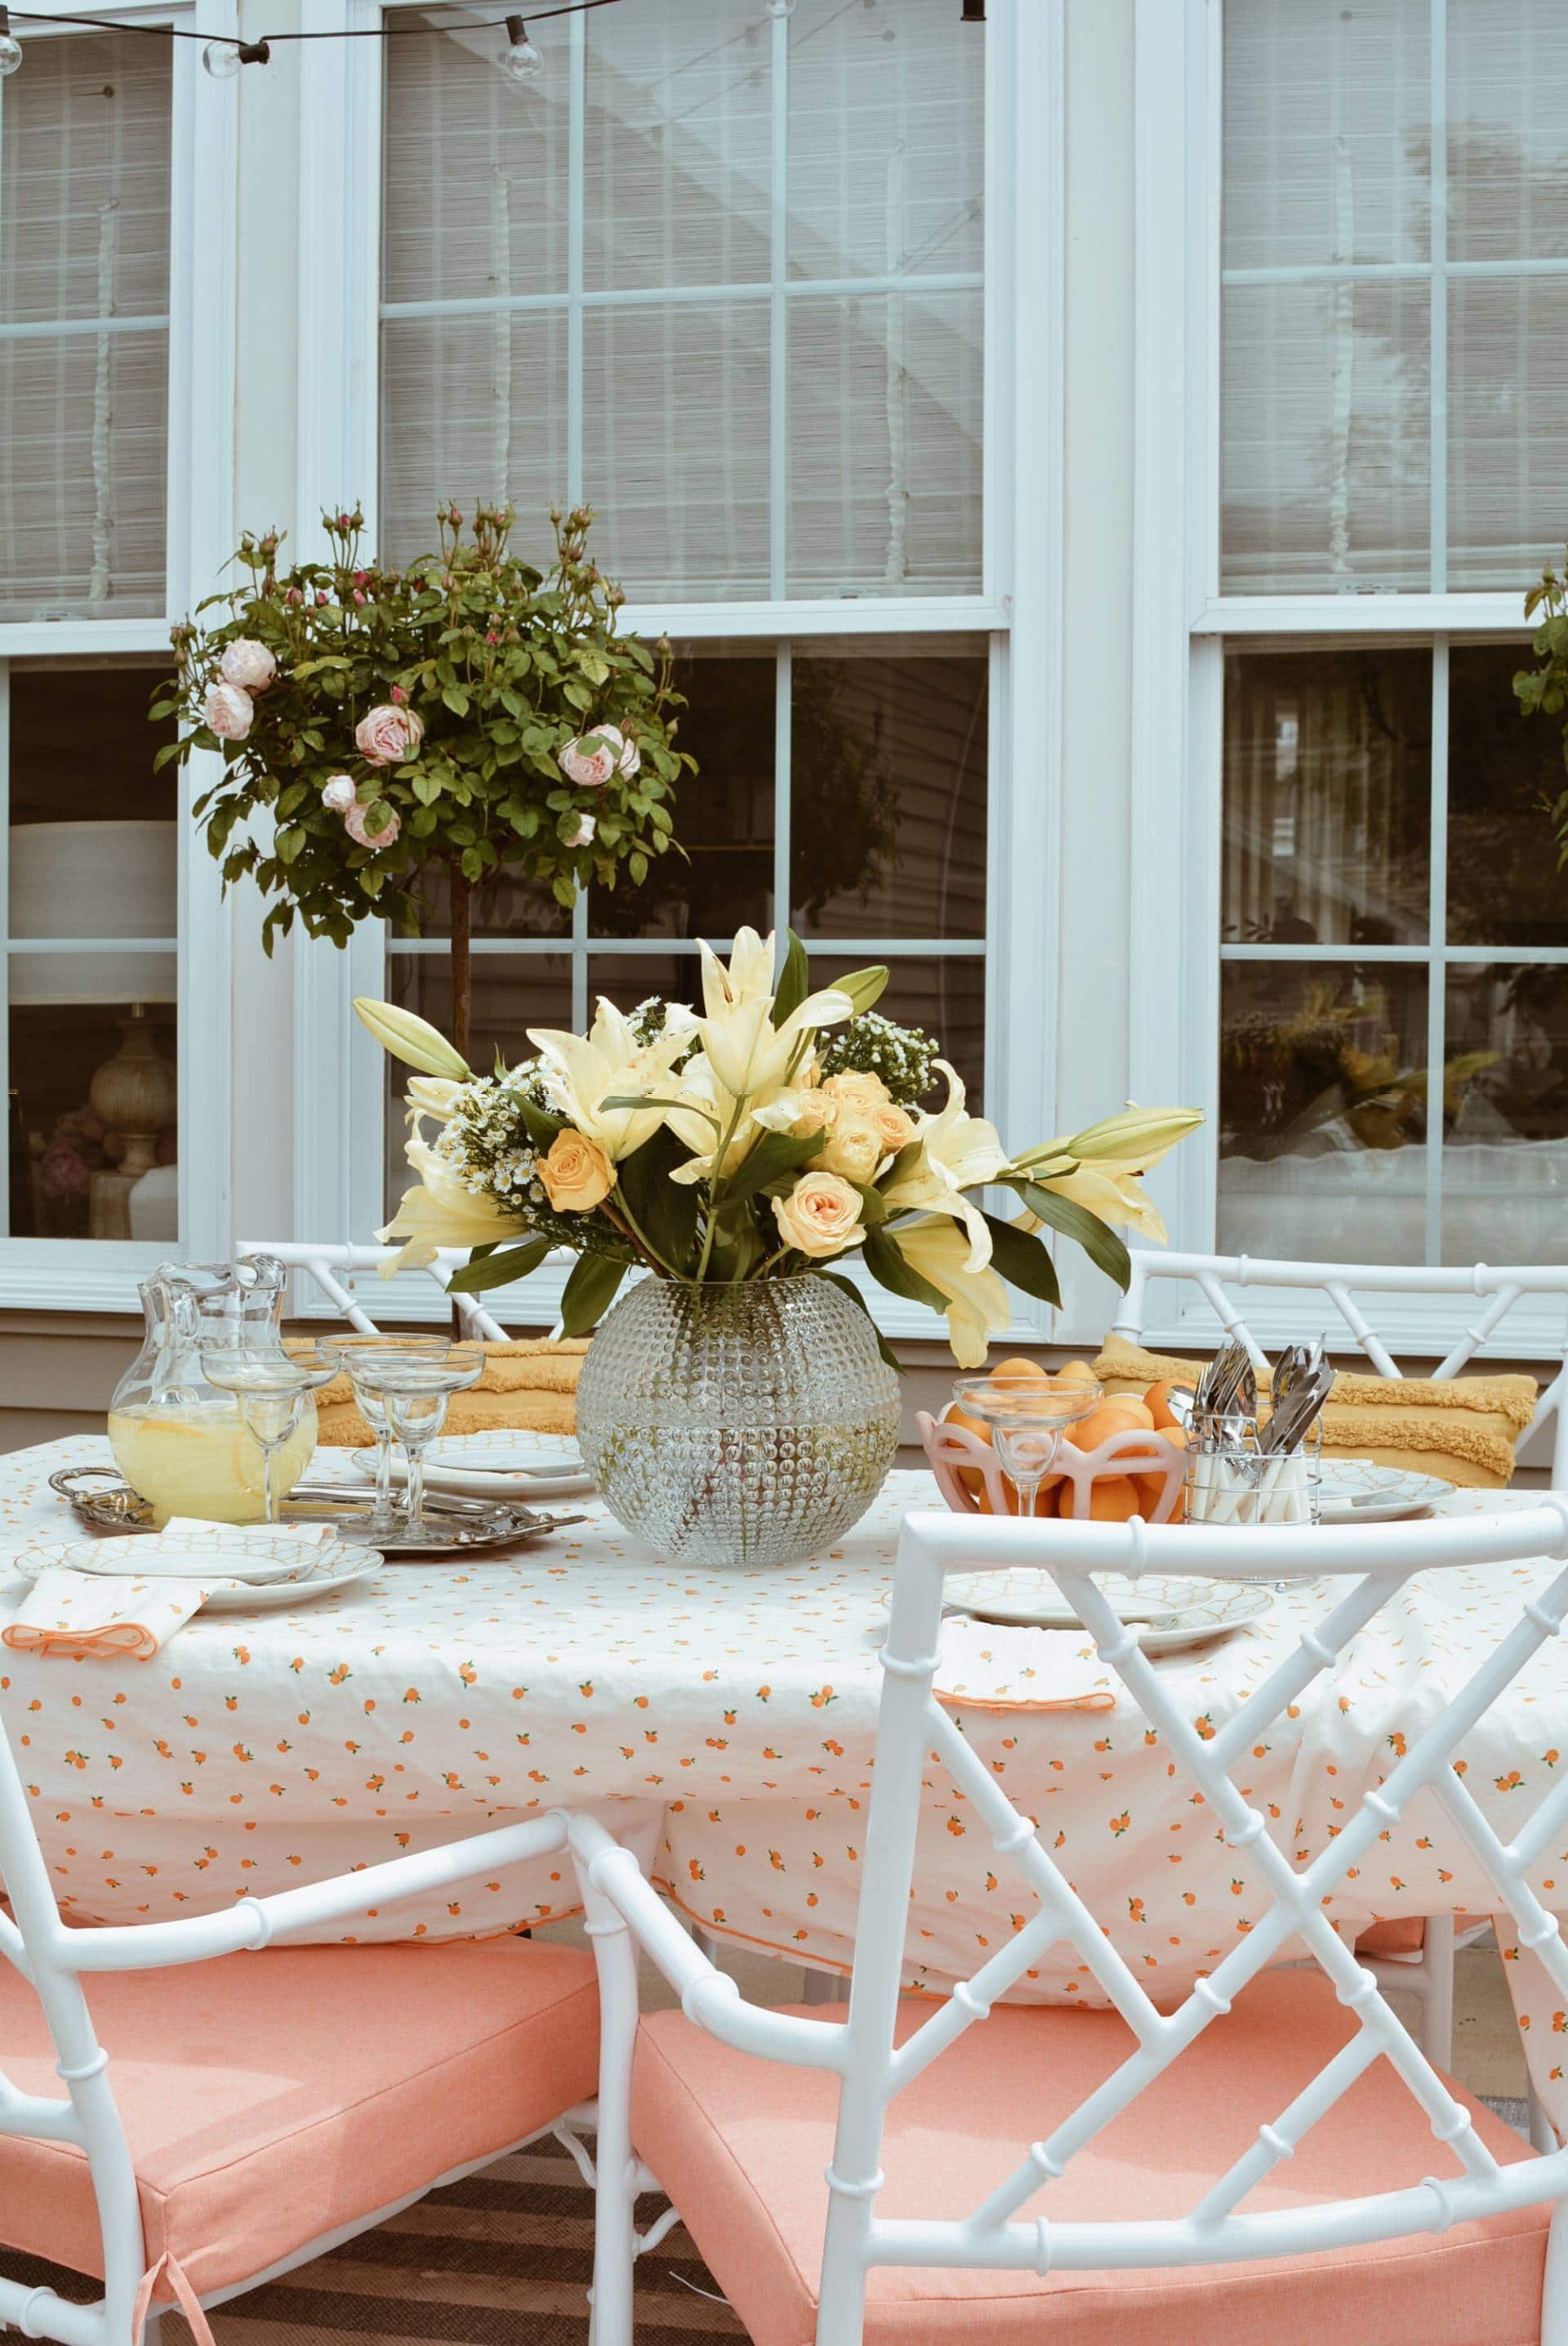 A Refreshing Summer Patio Dining Table Setting